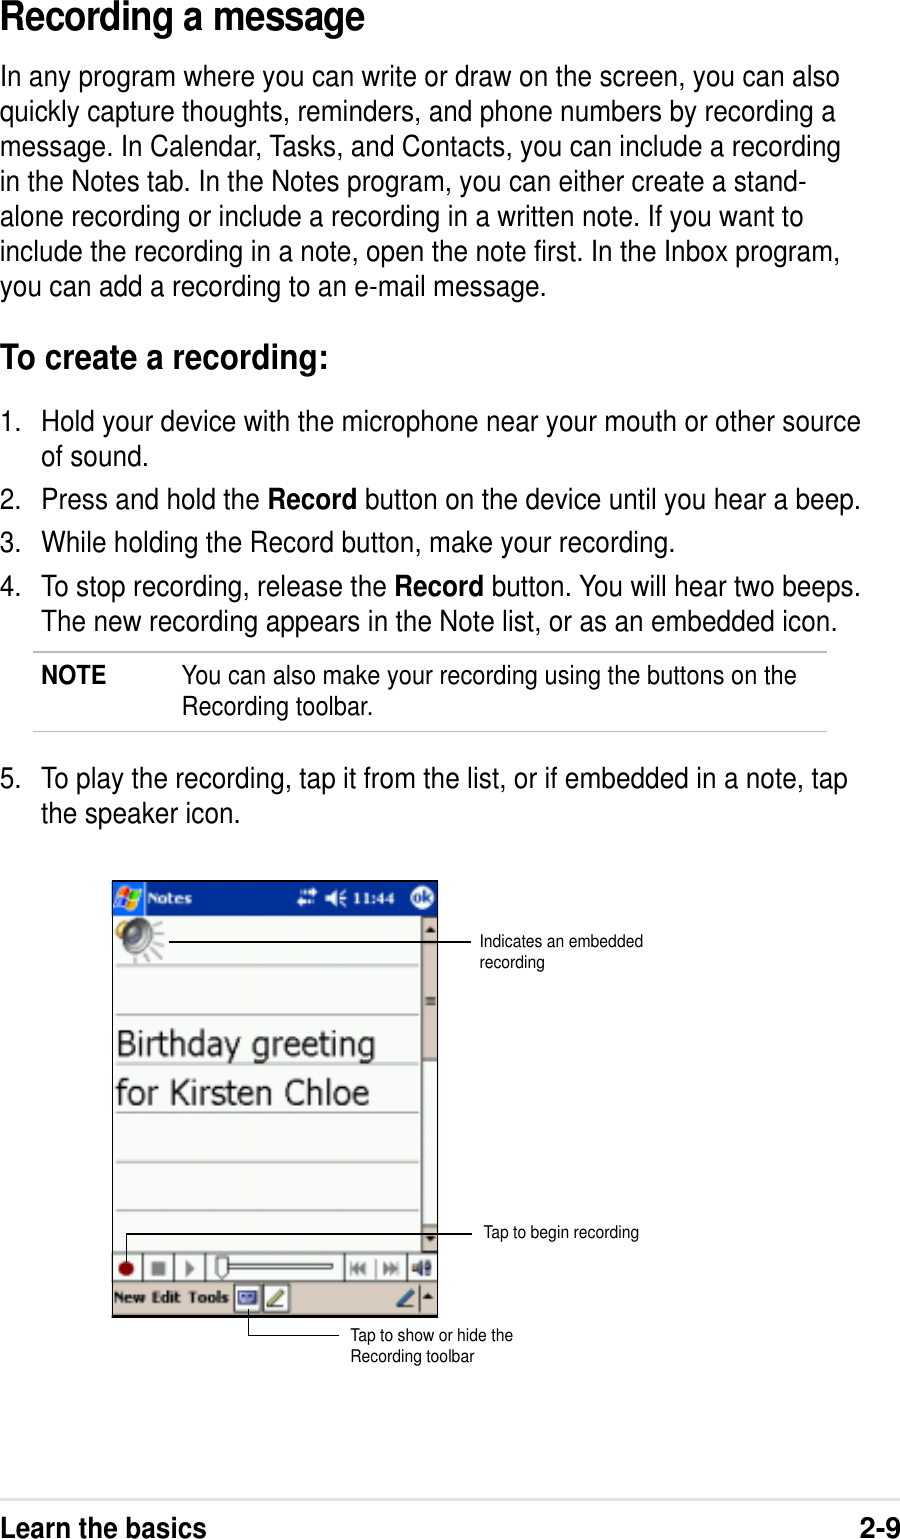 Learn the basics2-9Recording a messageIn any program where you can write or draw on the screen, you can alsoquickly capture thoughts, reminders, and phone numbers by recording amessage. In Calendar, Tasks, and Contacts, you can include a recordingin the Notes tab. In the Notes program, you can either create a stand-alone recording or include a recording in a written note. If you want toinclude the recording in a note, open the note first. In the Inbox program,you can add a recording to an e-mail message.To create a recording:1. Hold your device with the microphone near your mouth or other sourceof sound.2. Press and hold the Record button on the device until you hear a beep.3. While holding the Record button, make your recording.4. To stop recording, release the Record button. You will hear two beeps.The new recording appears in the Note list, or as an embedded icon.NOTE You can also make your recording using the buttons on theRecording toolbar.5. To play the recording, tap it from the list, or if embedded in a note, tapthe speaker icon.Indicates an embeddedrecordingTap to show or hide theRecording toolbarTap to begin recording